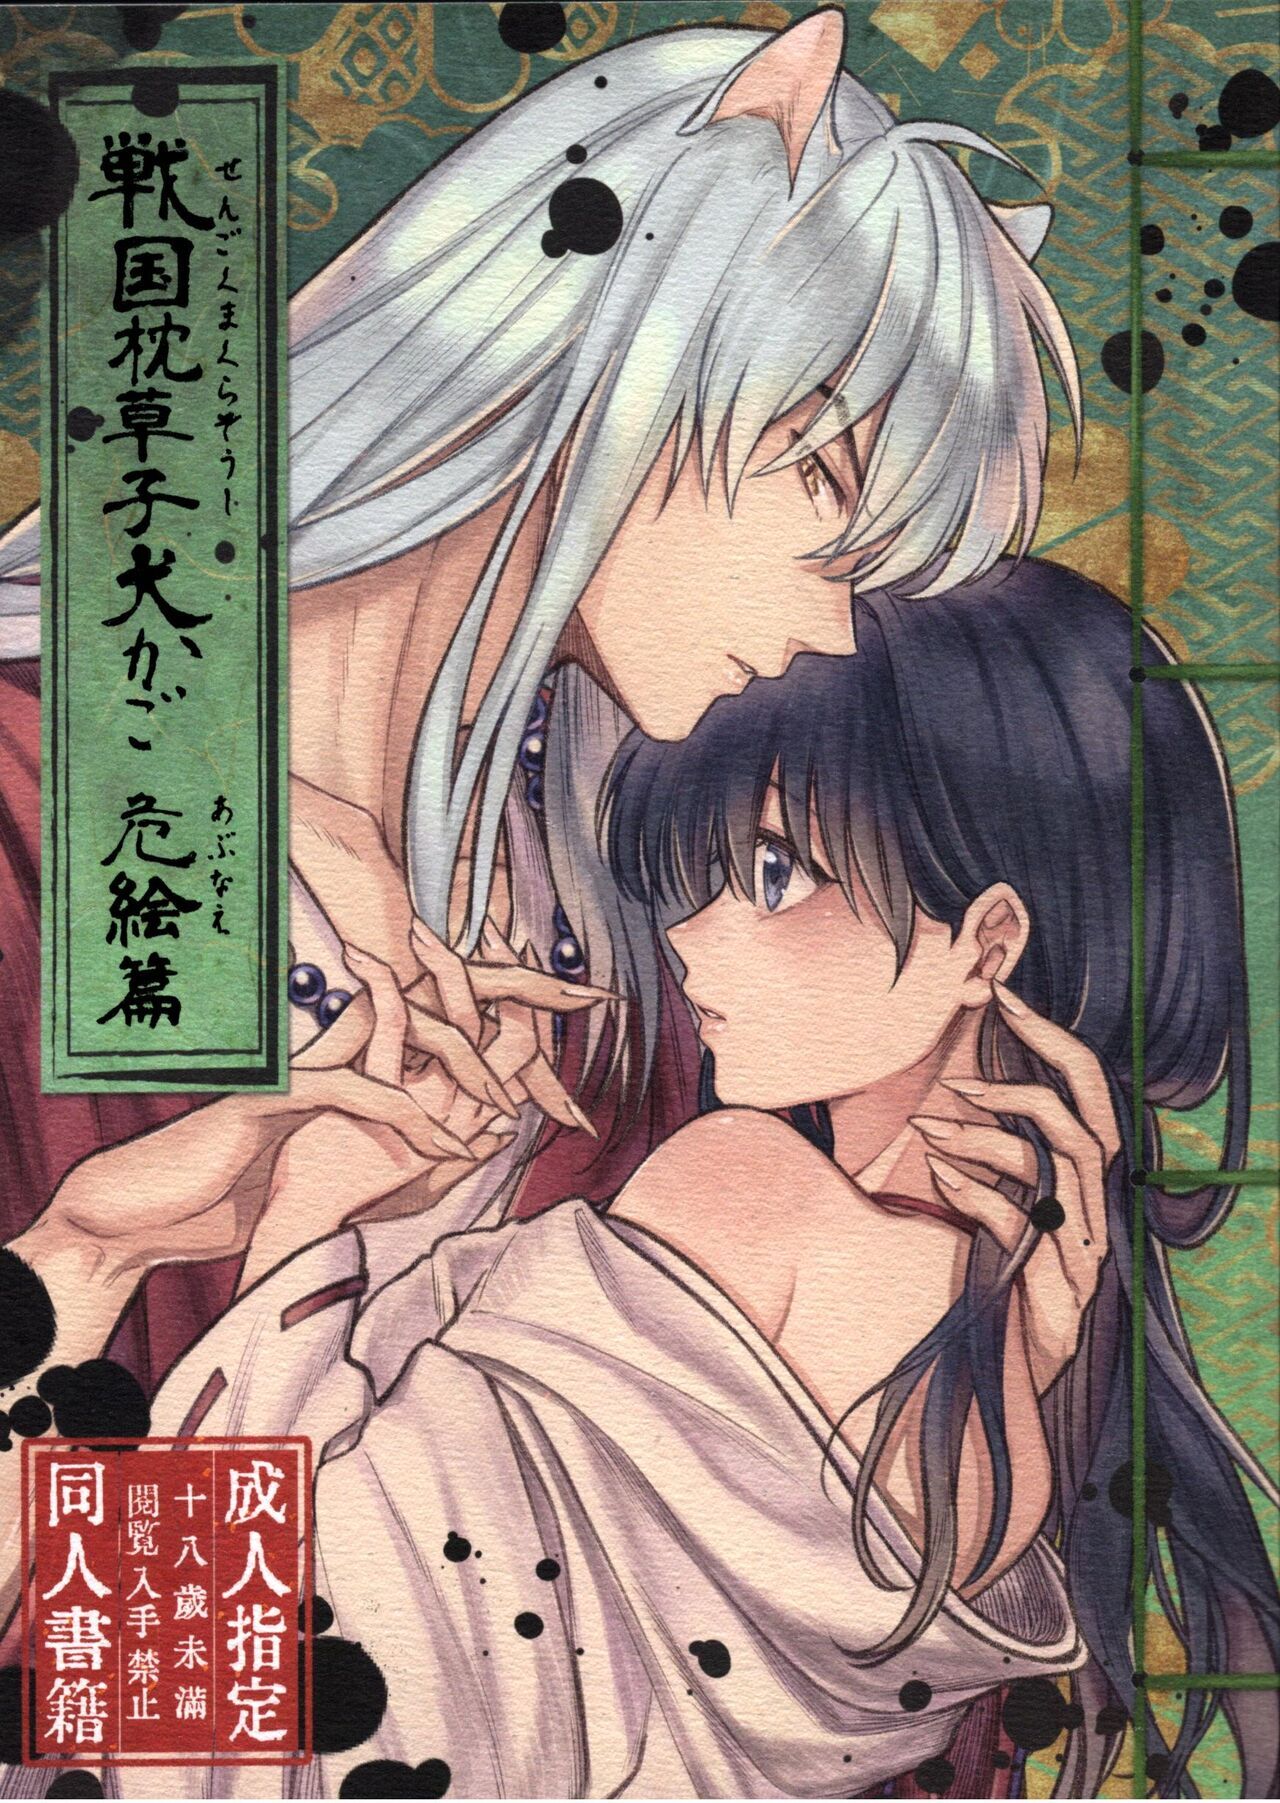 Kikyo Inuyasha Porn - Inuyasha - sorted by number of objects - Free Hentai